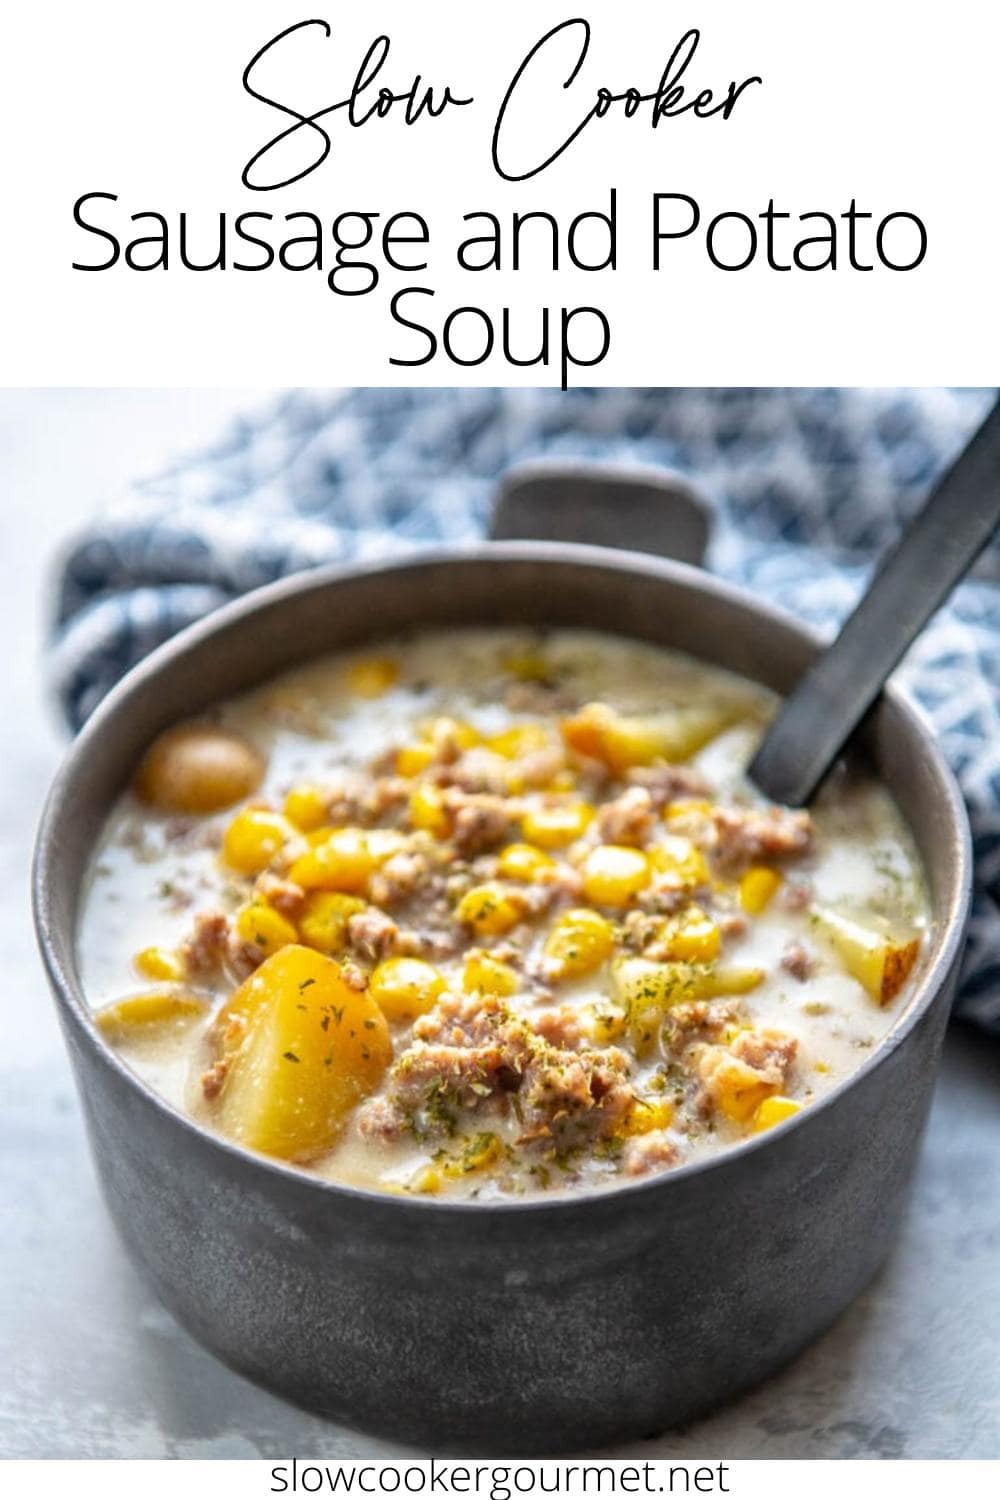 Slow Cooker Sausage and Potato Soup - Slow Cooker Gourmet